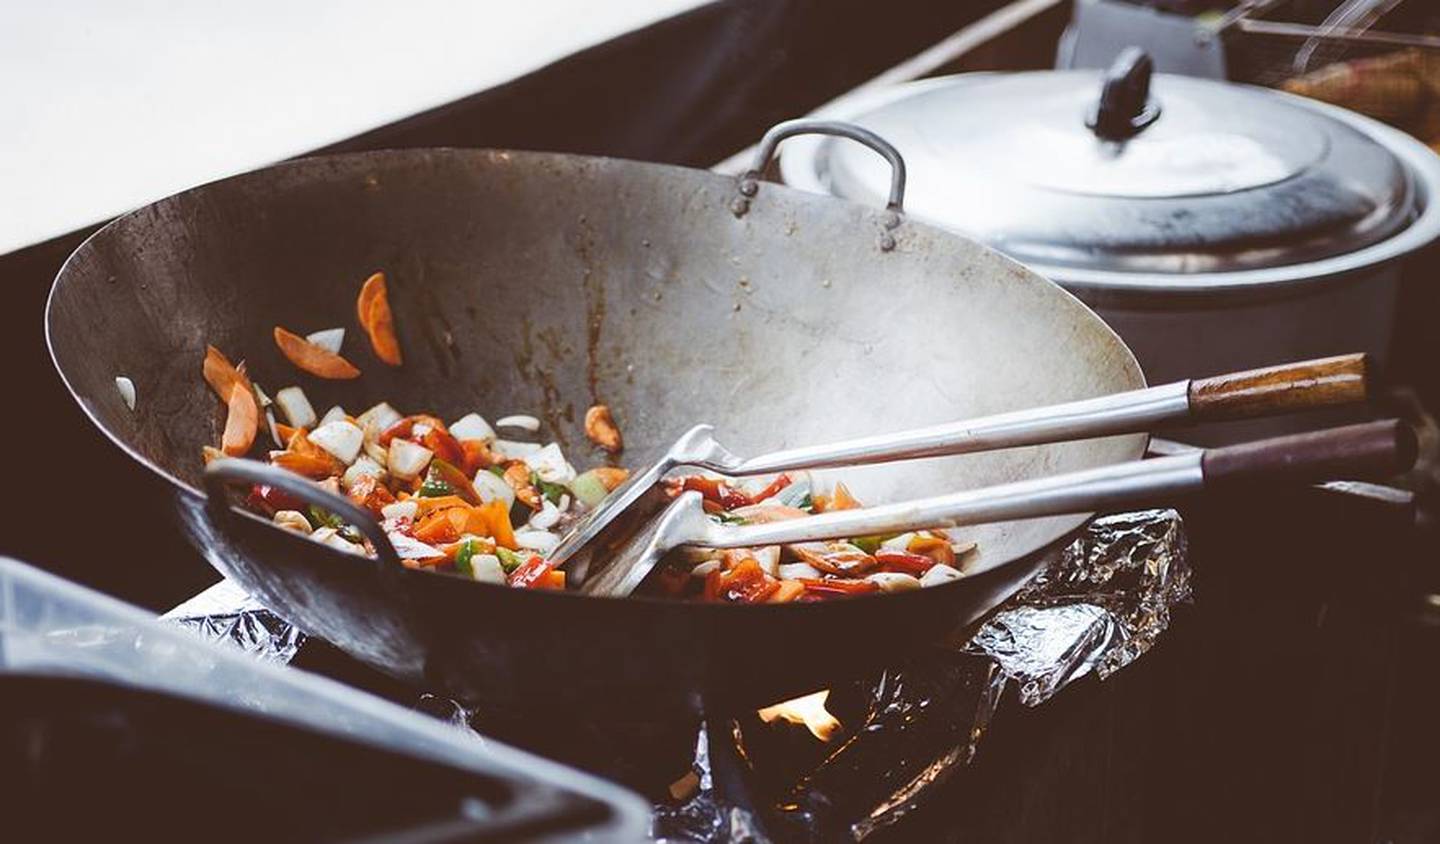 This is how you should cook food if your goal is to lose weight 5